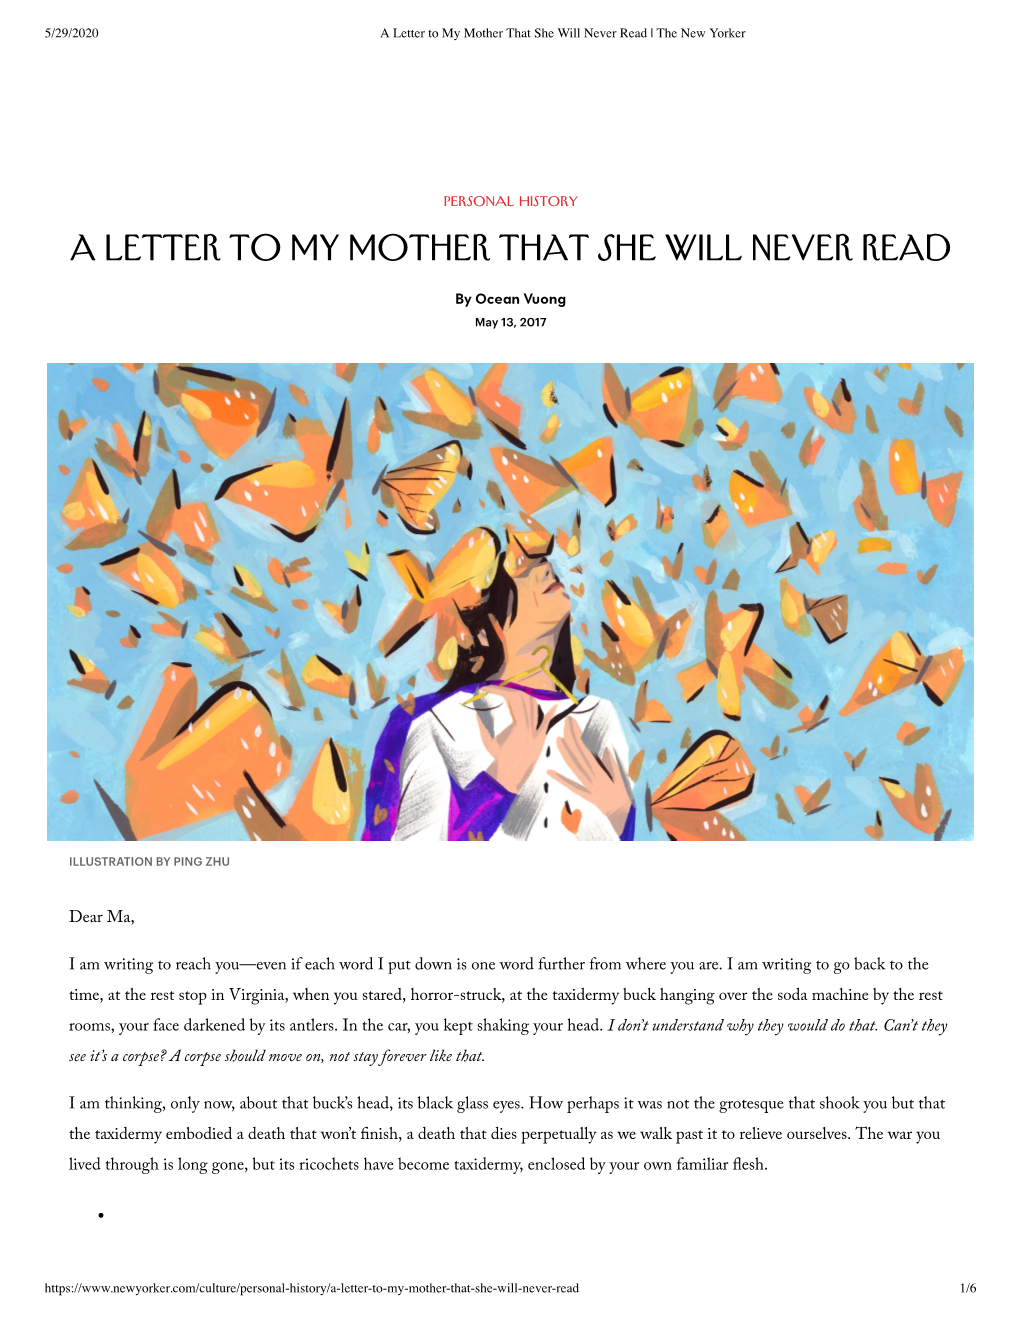 A Letter to My Mother That She Will Never Read | the New Yorker